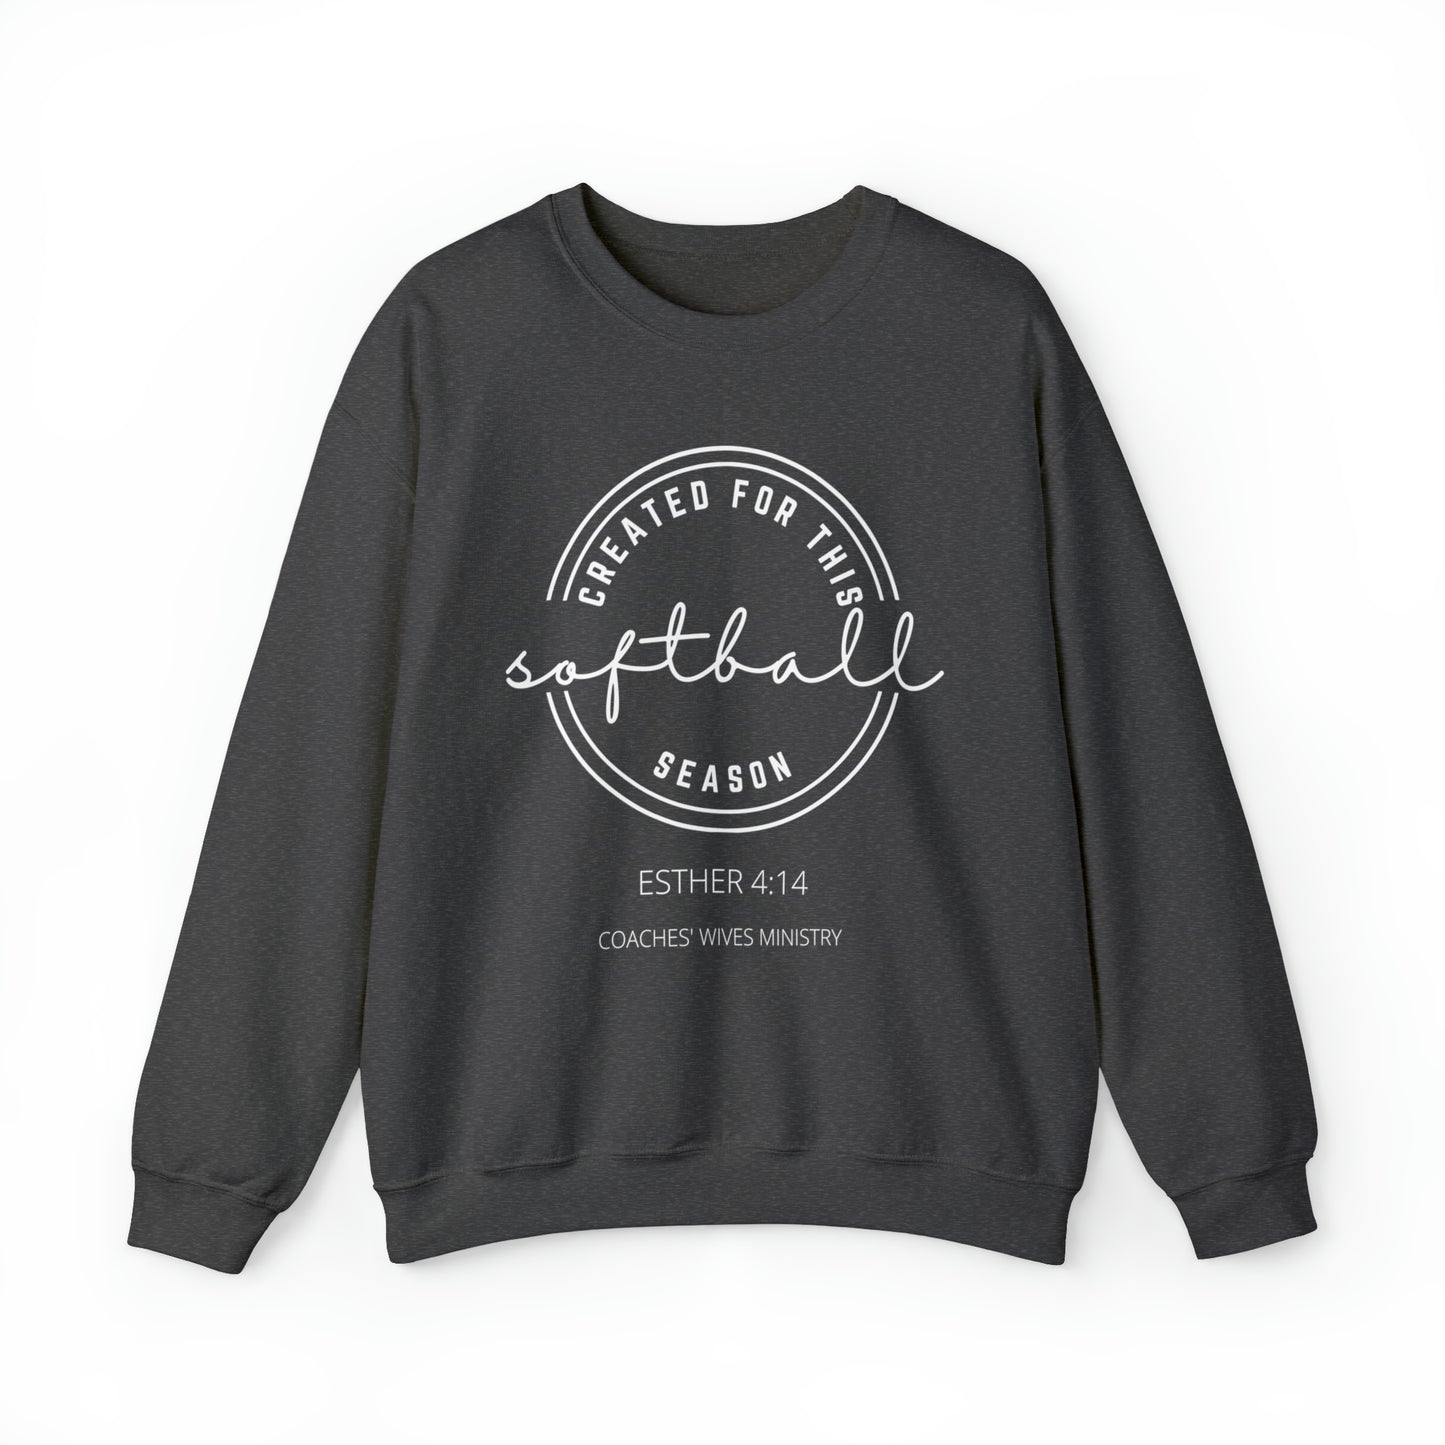 Created For This Season Cozy Sweatshirt For The Softball Coach Wife